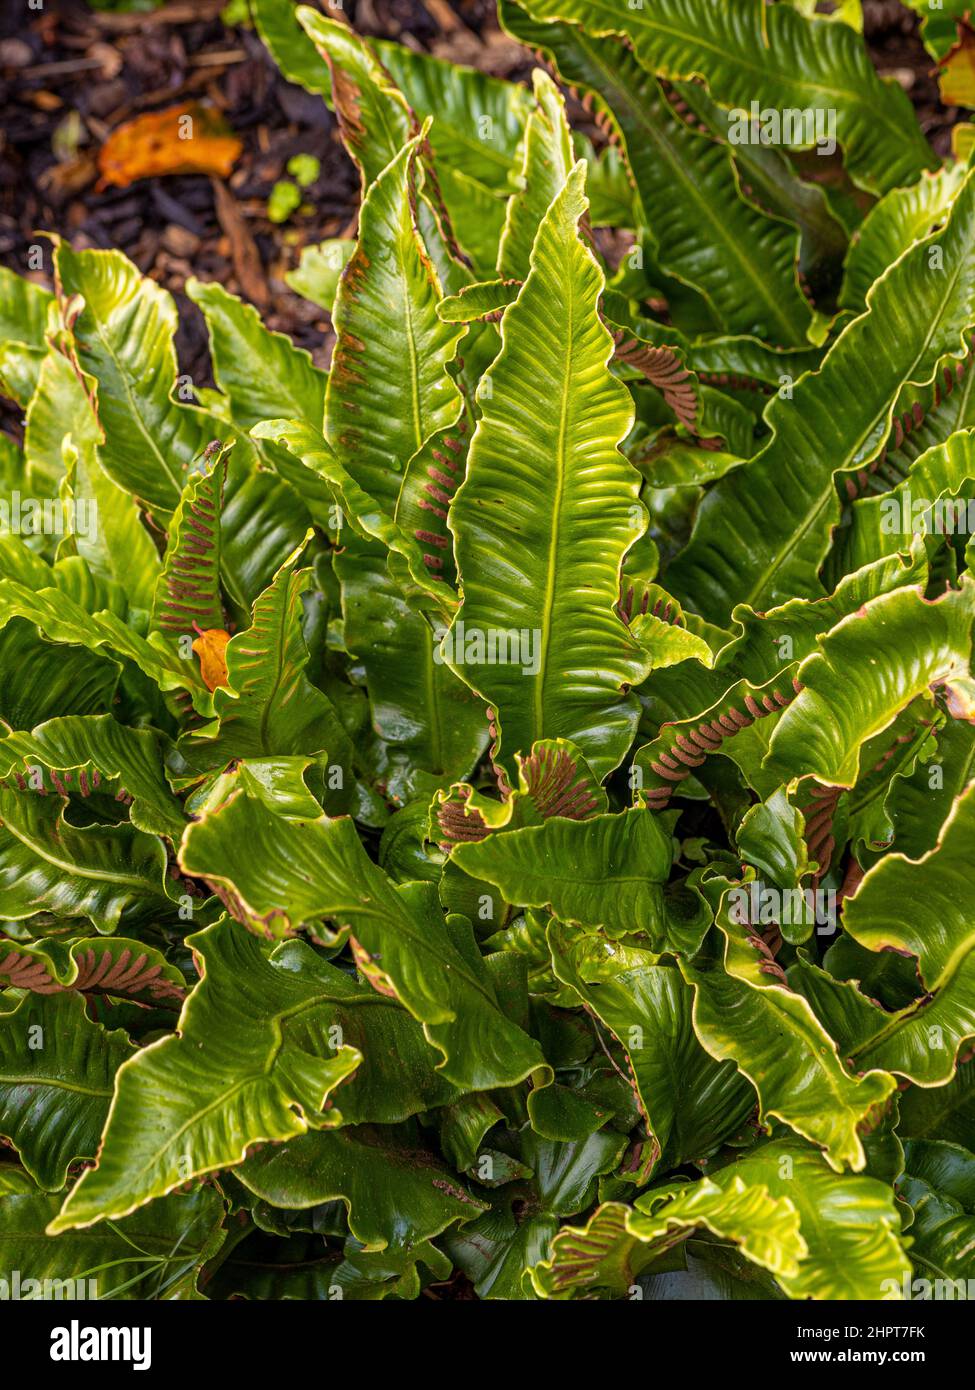 Asplenium scolopendrium commonly called hart's tongue fern growing in a UK garden. Stock Photo